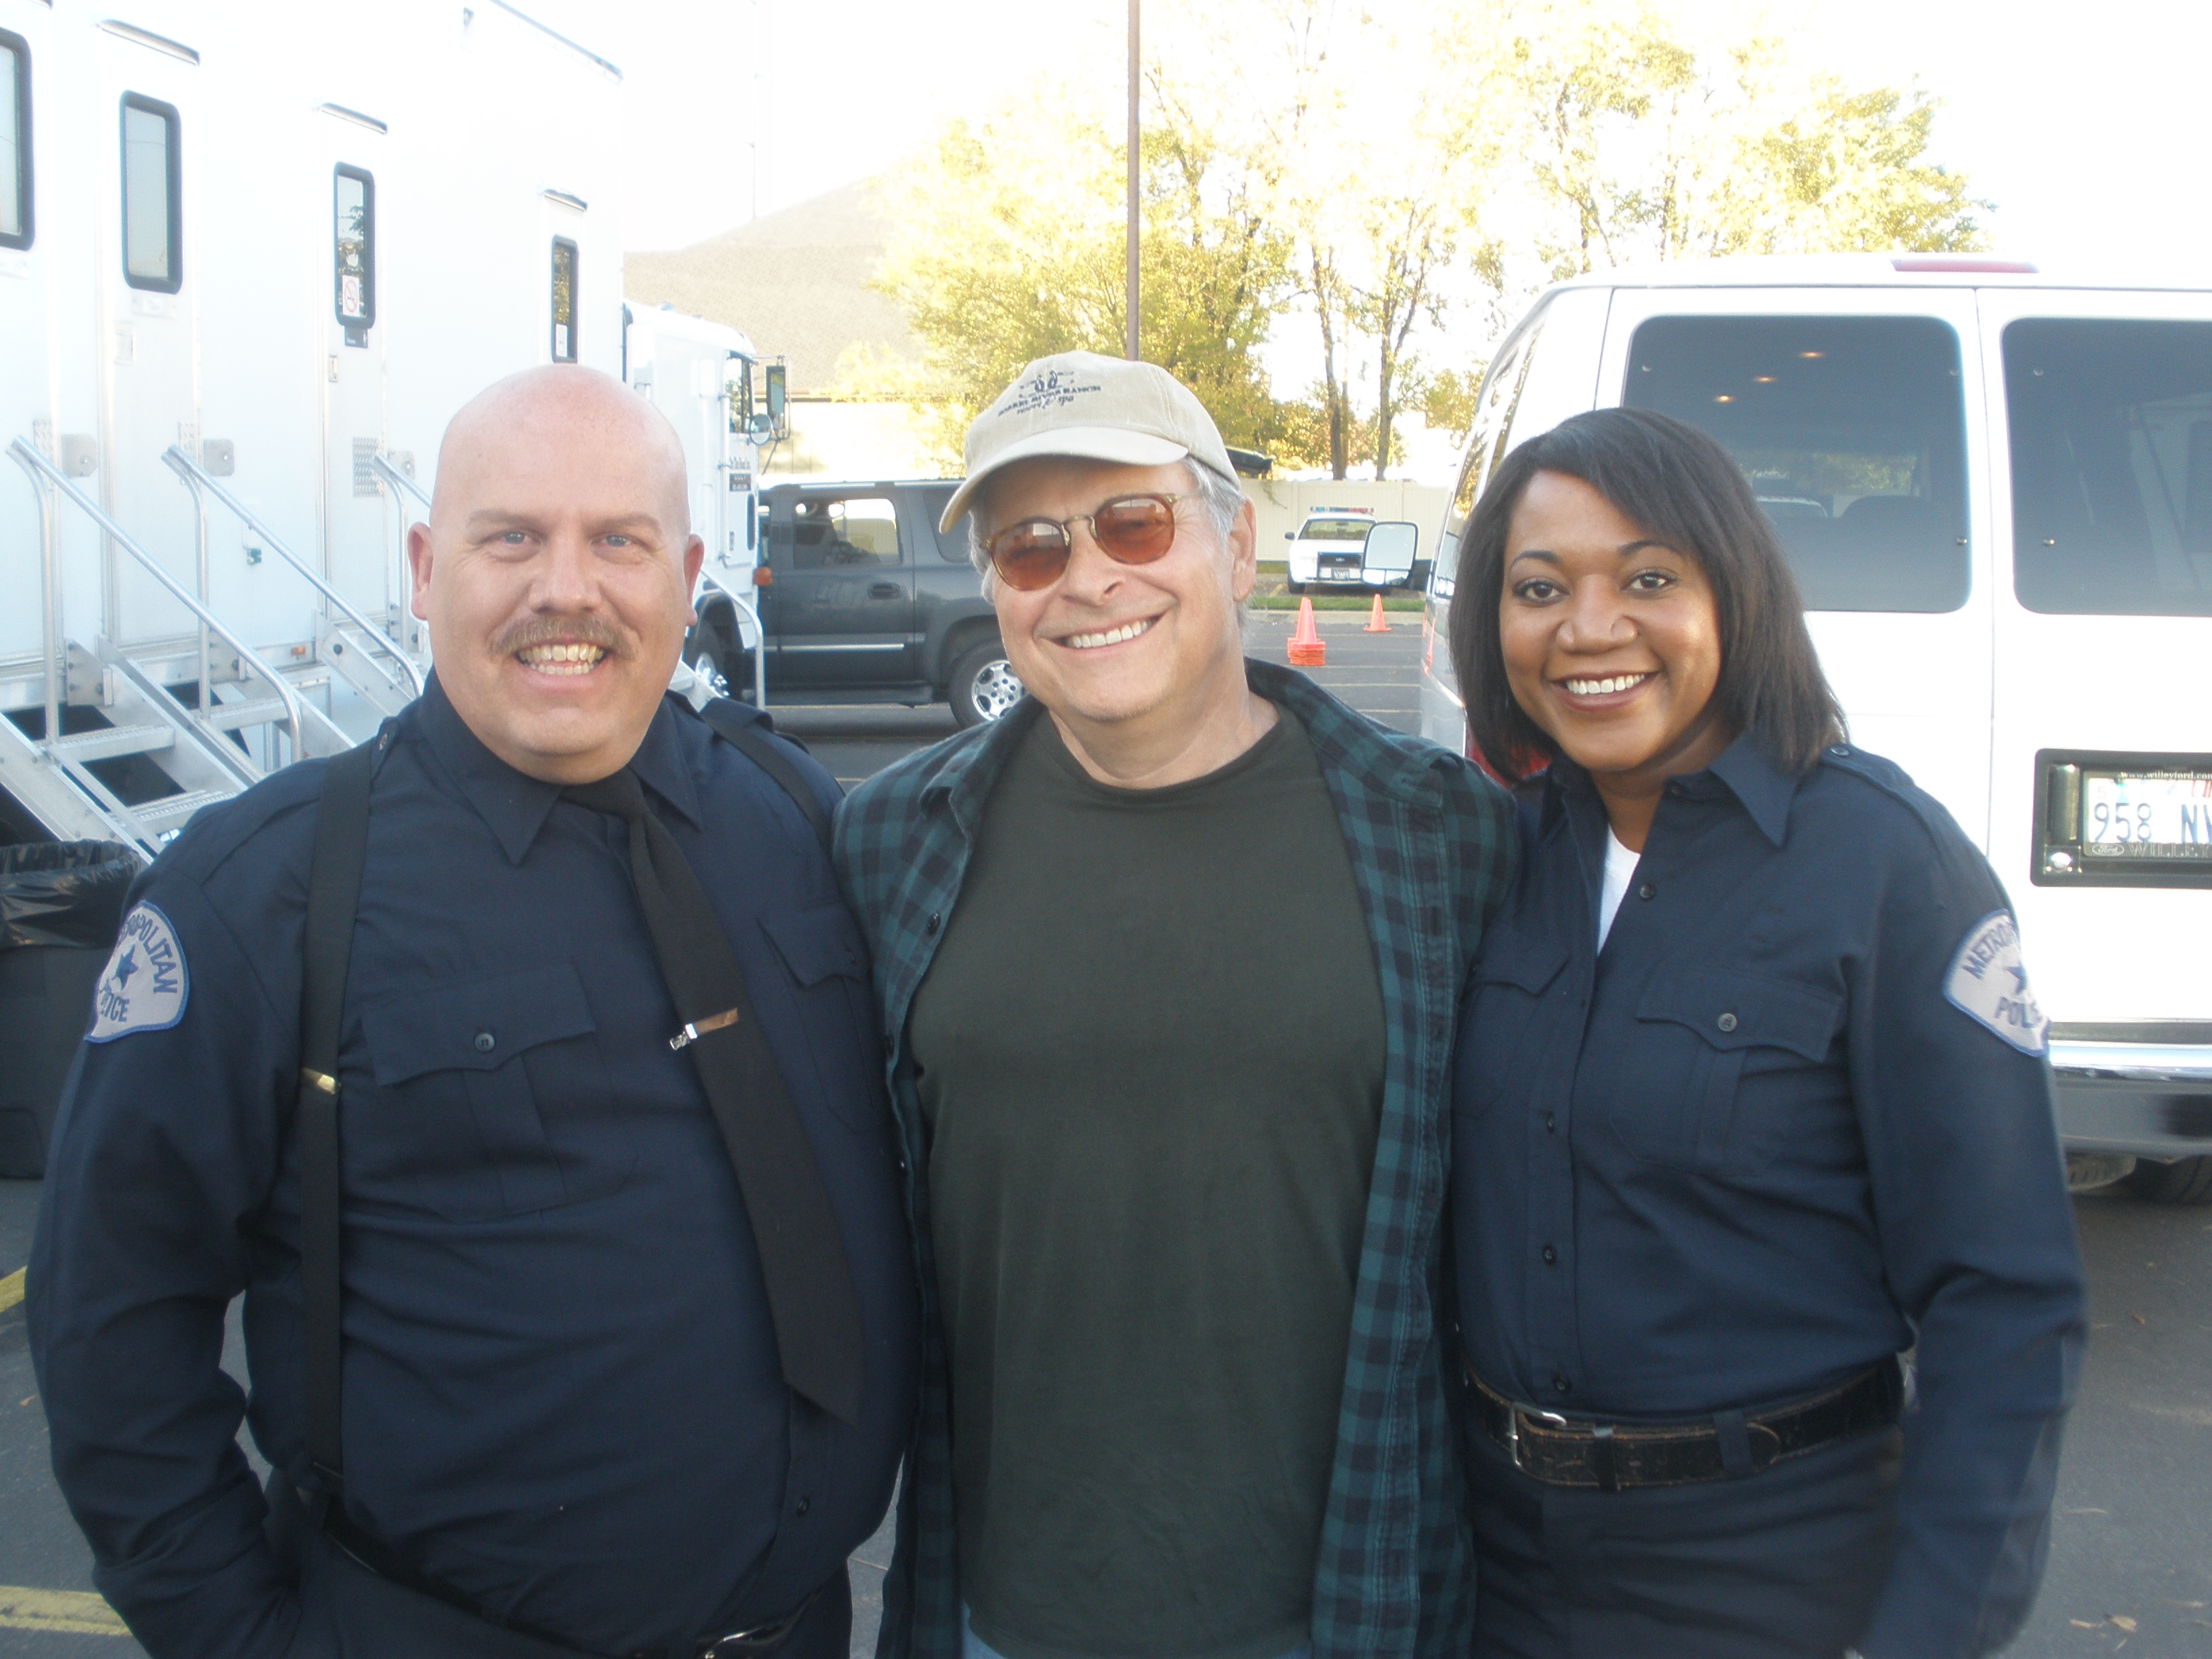 D.L. with Lawrence Kasdan and Yolanda Wood on the set of 